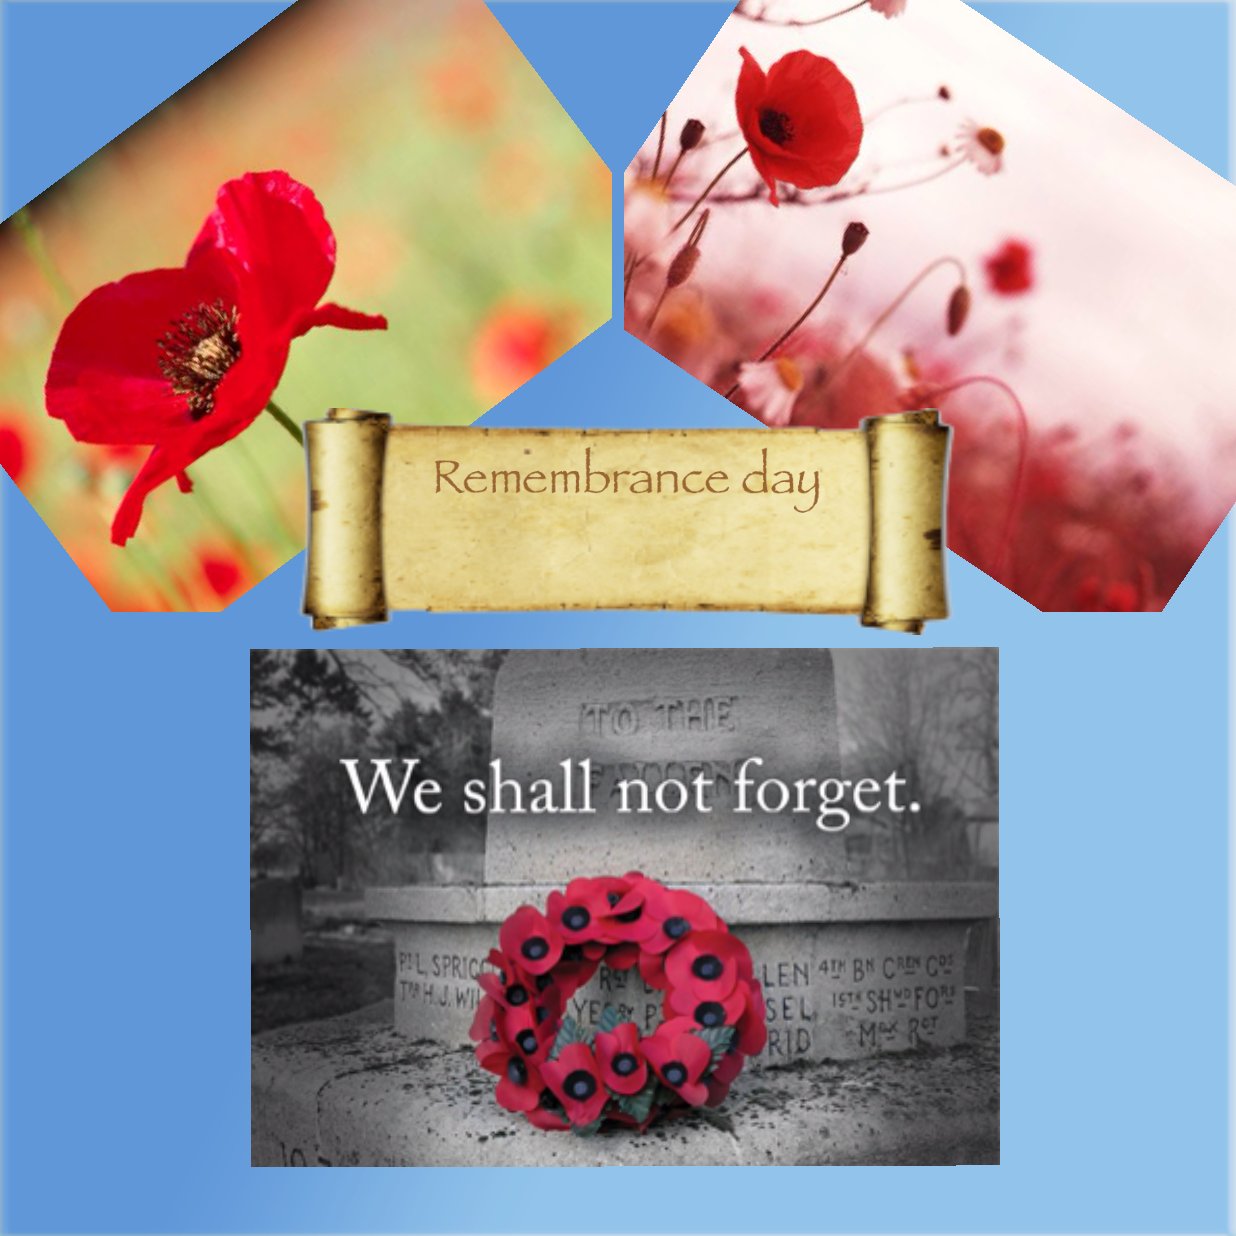 REMEMBRANCE DAY!